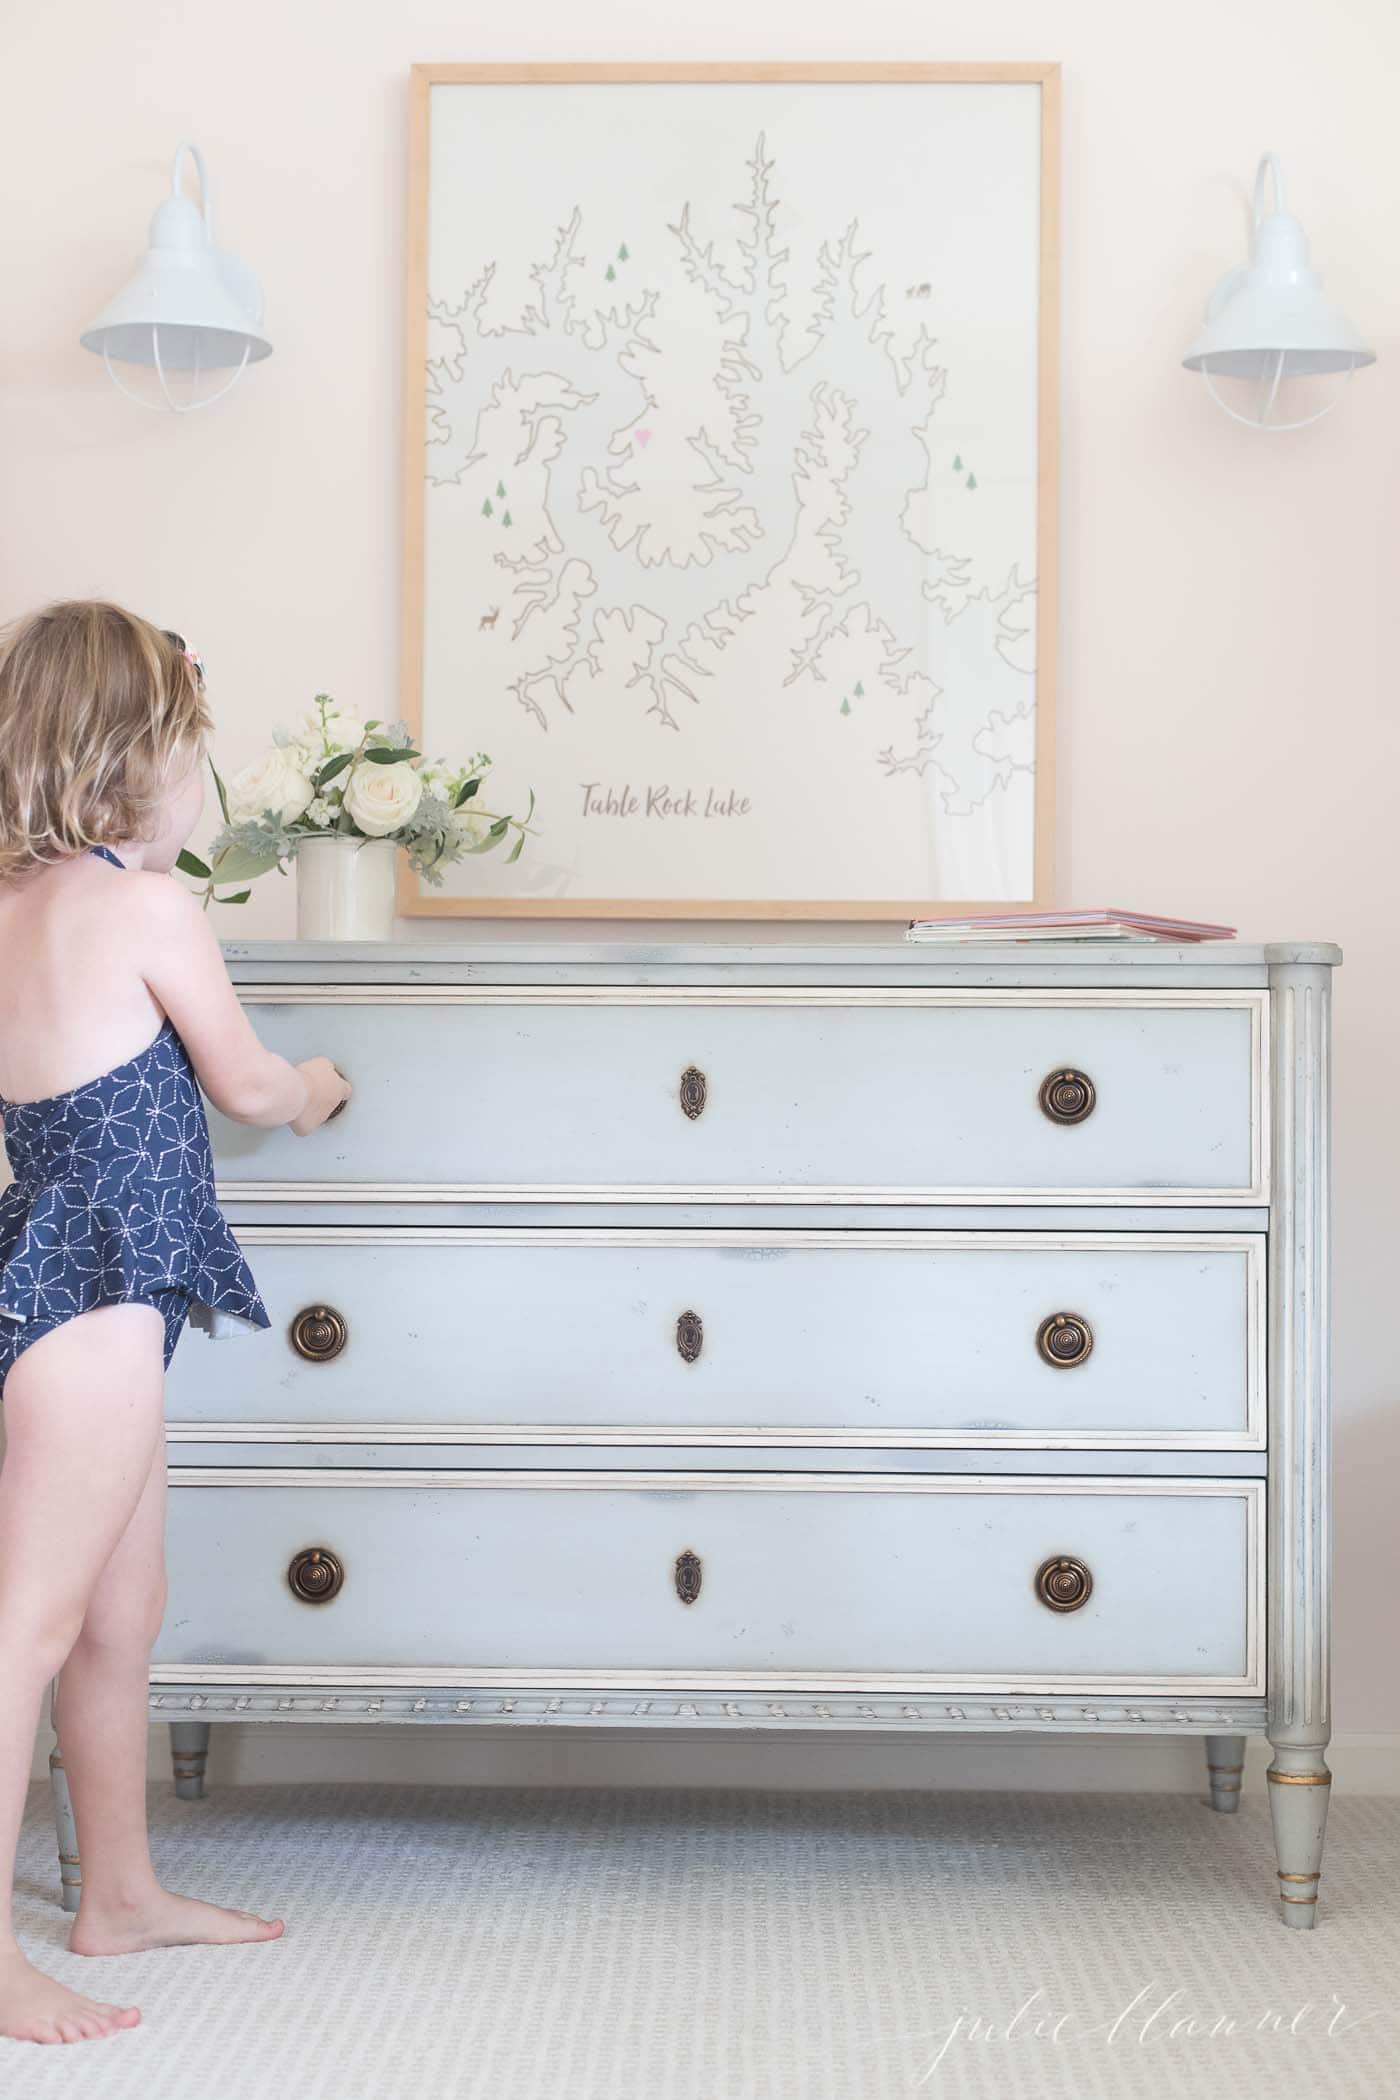 patterned carpet and a soft blue dresser in a little girl's bedroom, girl in swimsuit opening the dresser.